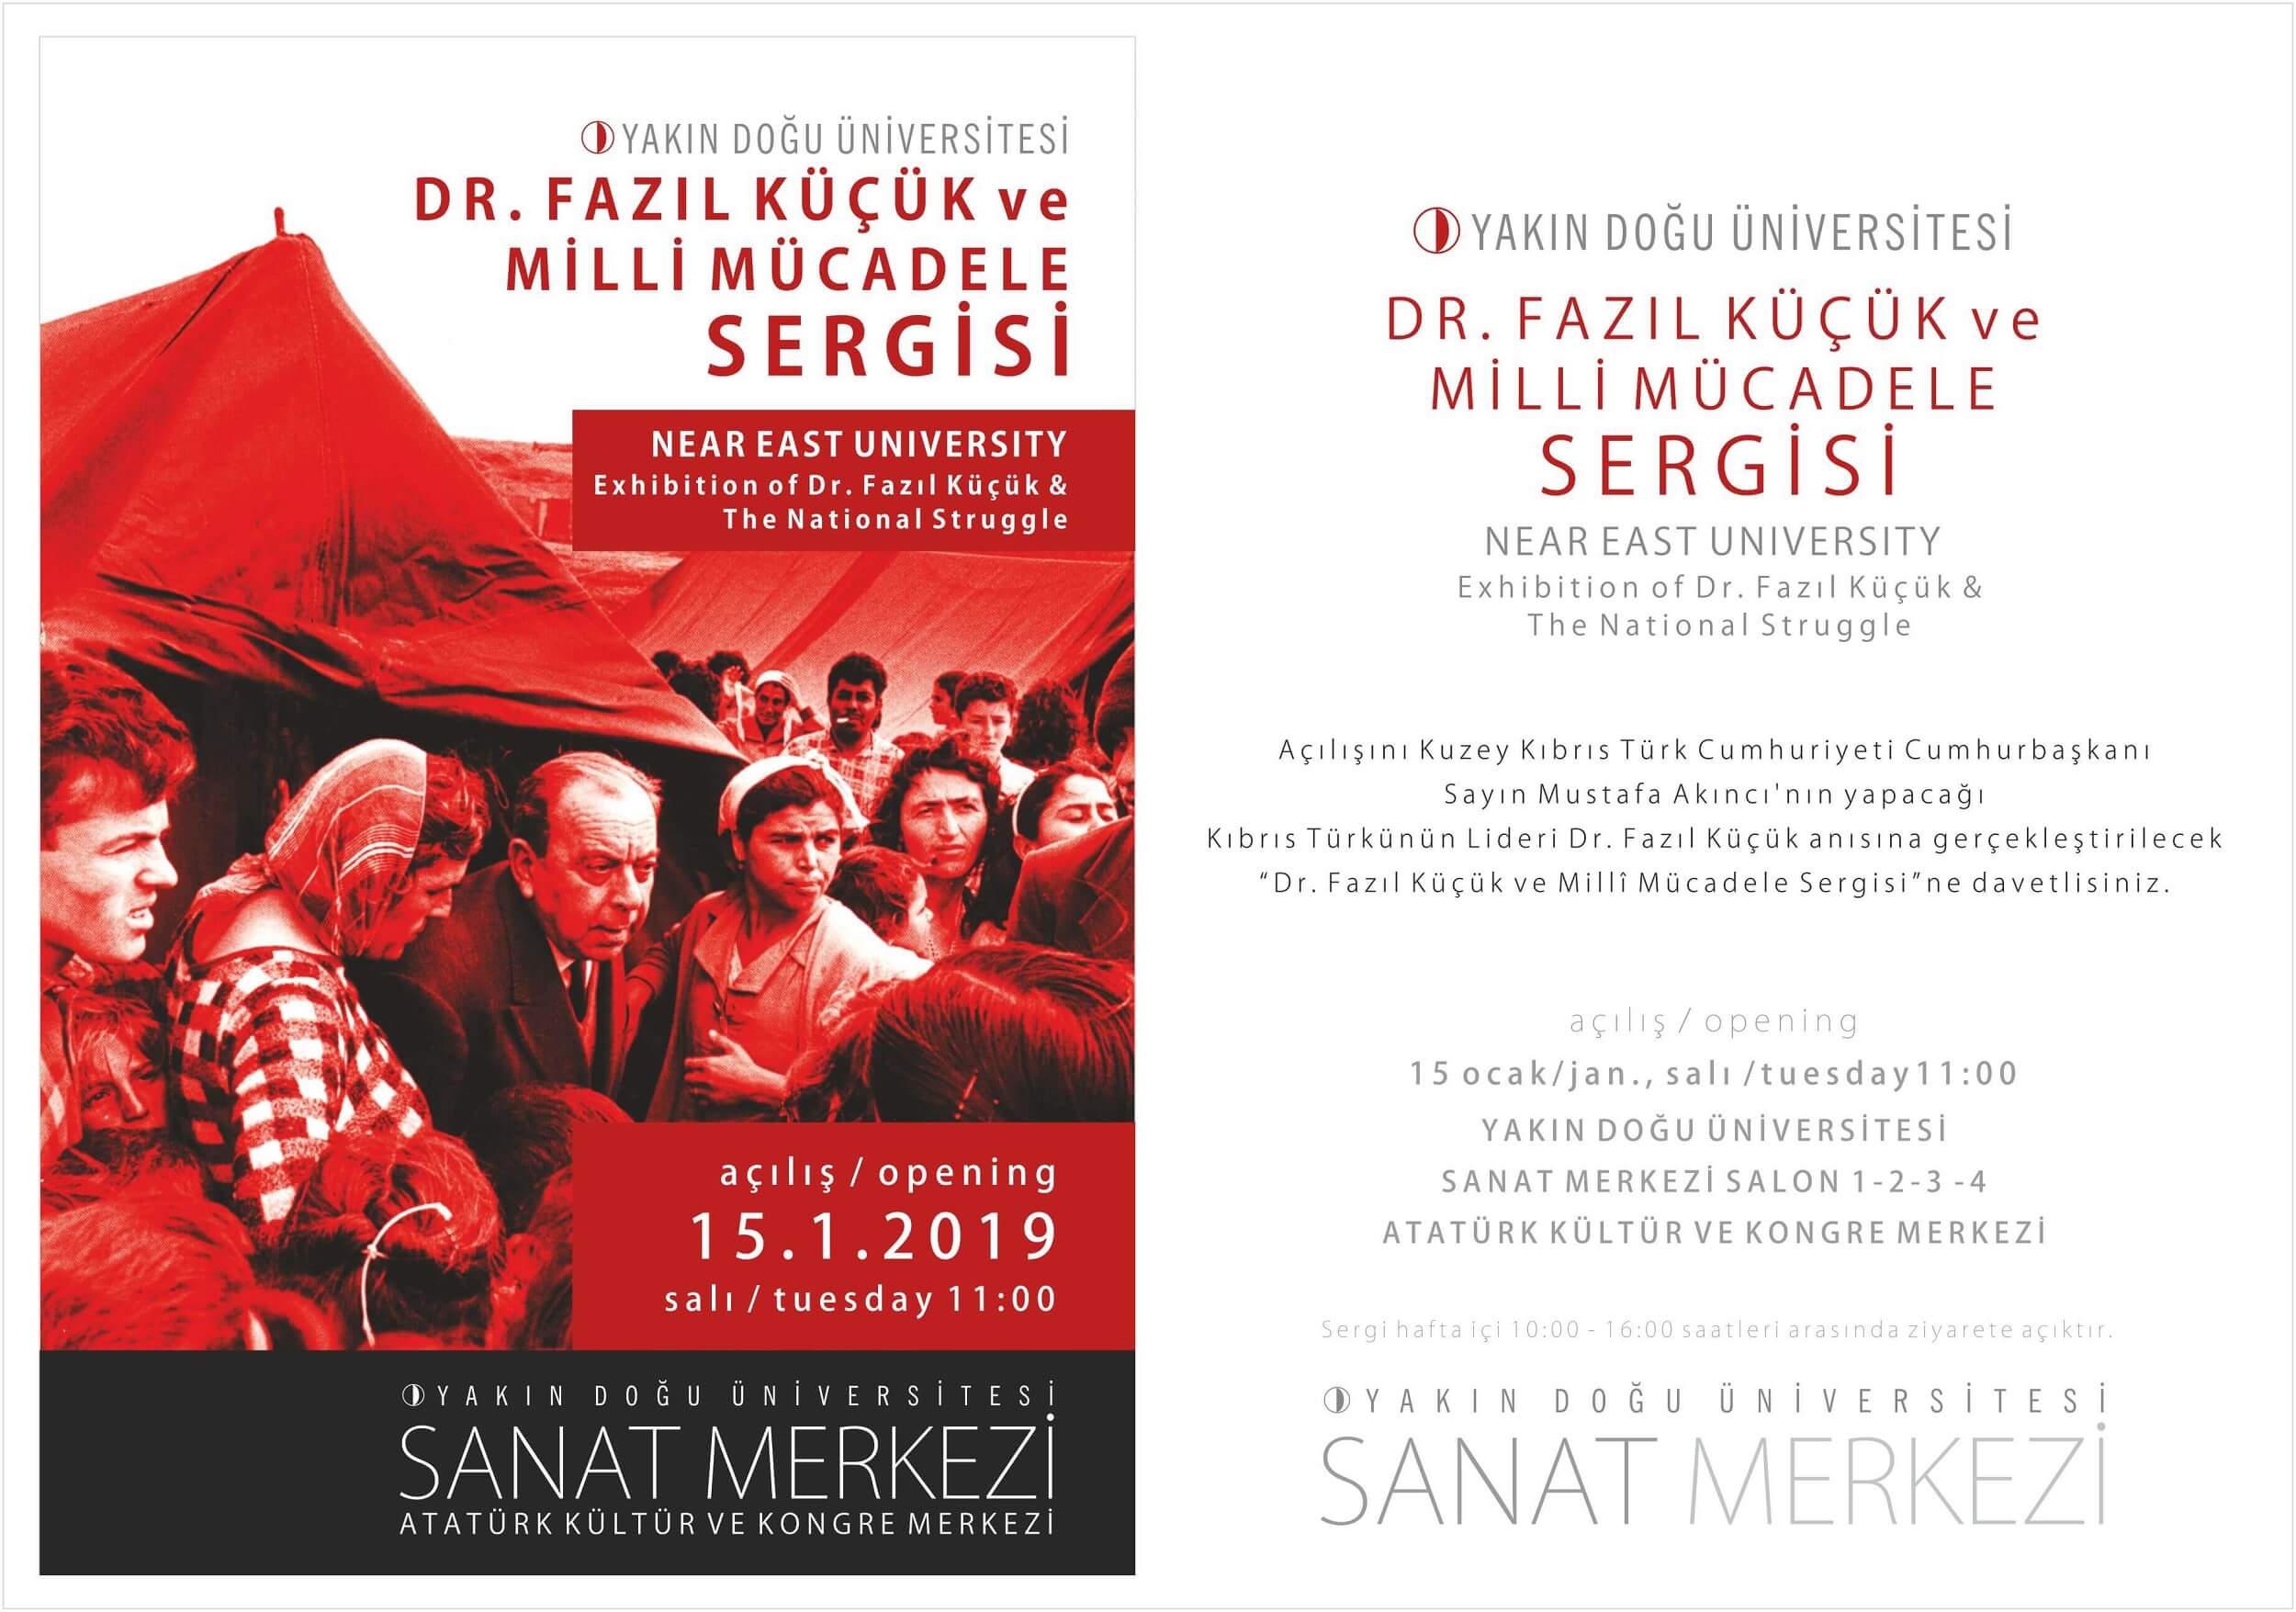 “Dr. Fazıl Küçük and National Struggle” Exhibition will be opened by the President of TRNC Mustafa Akıncı and will be exhibited in the 14 Turkic Republics